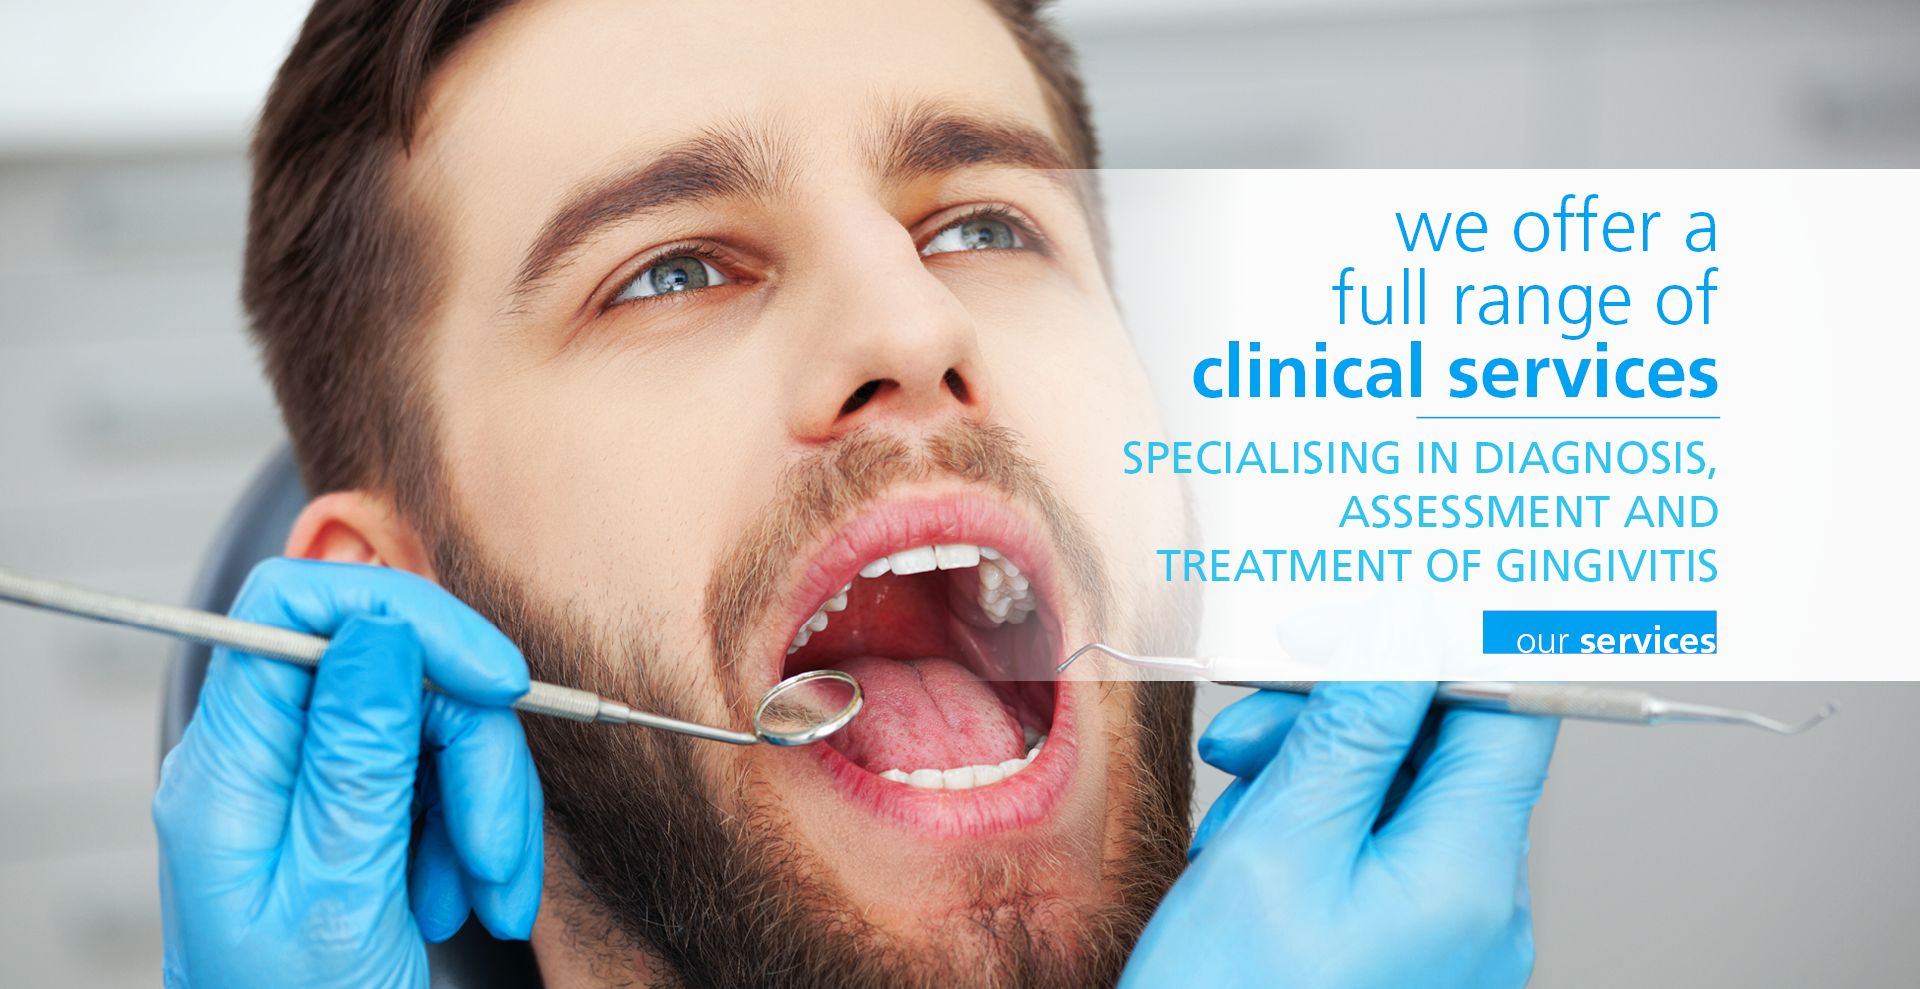 We offer a full range of clinical services. Speacialising in diagnosis, assessment and treatment of gingivitis. Our services.